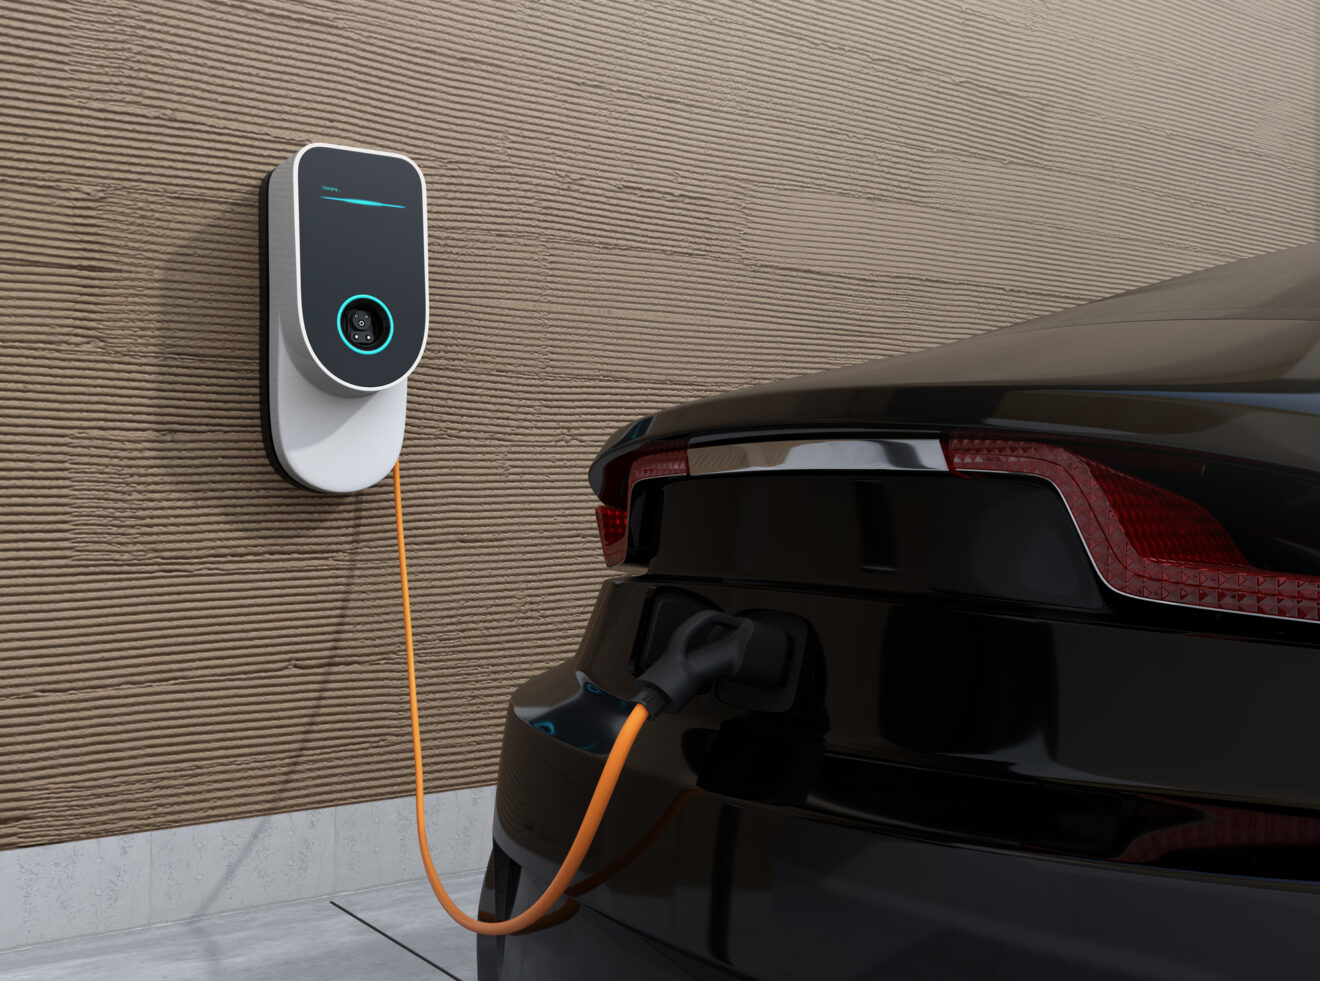 Charging black electric vehicle at home